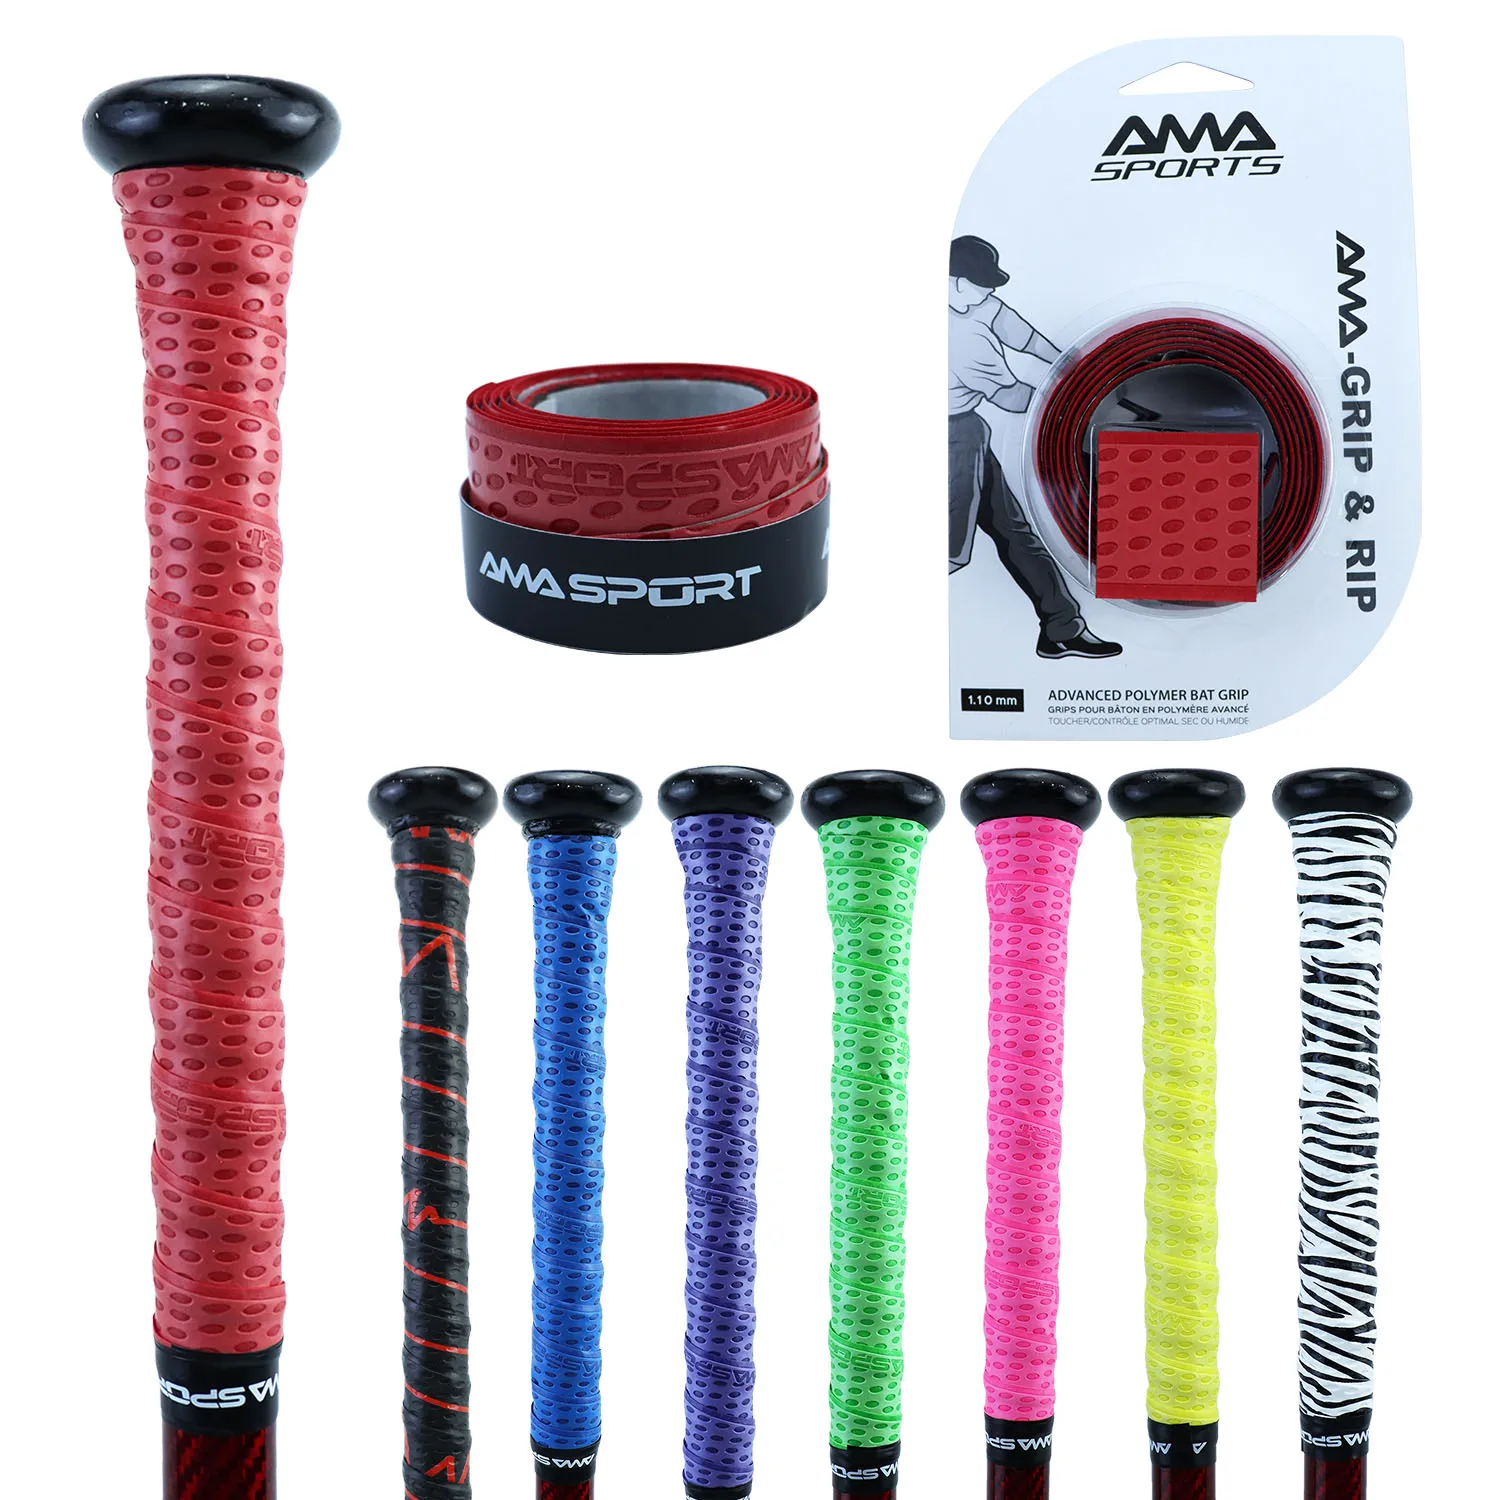 Ideal for Baseball/Softball Bats to Enhance Player Bat Grip Red Create Custom Designs and Personalize Your Bat Reduce Bat Weight with Tape vs Grips Easton Deluxe Bat Grip Tape 2020